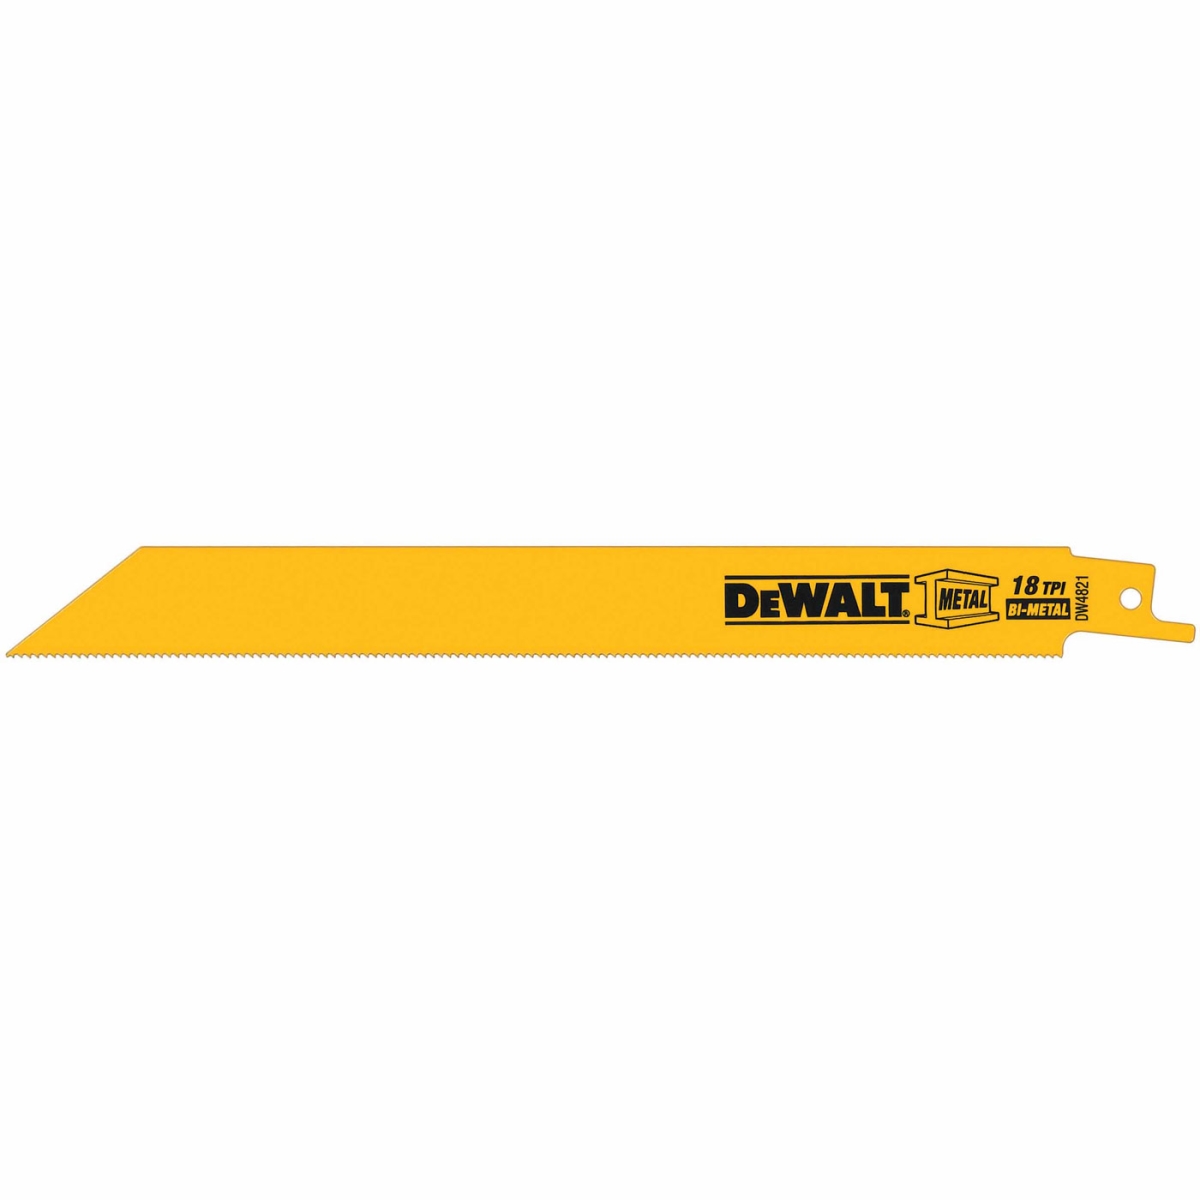 Dw4821 Recrip Saw Blade 8 In. 18 Tpi - Pack Of 5